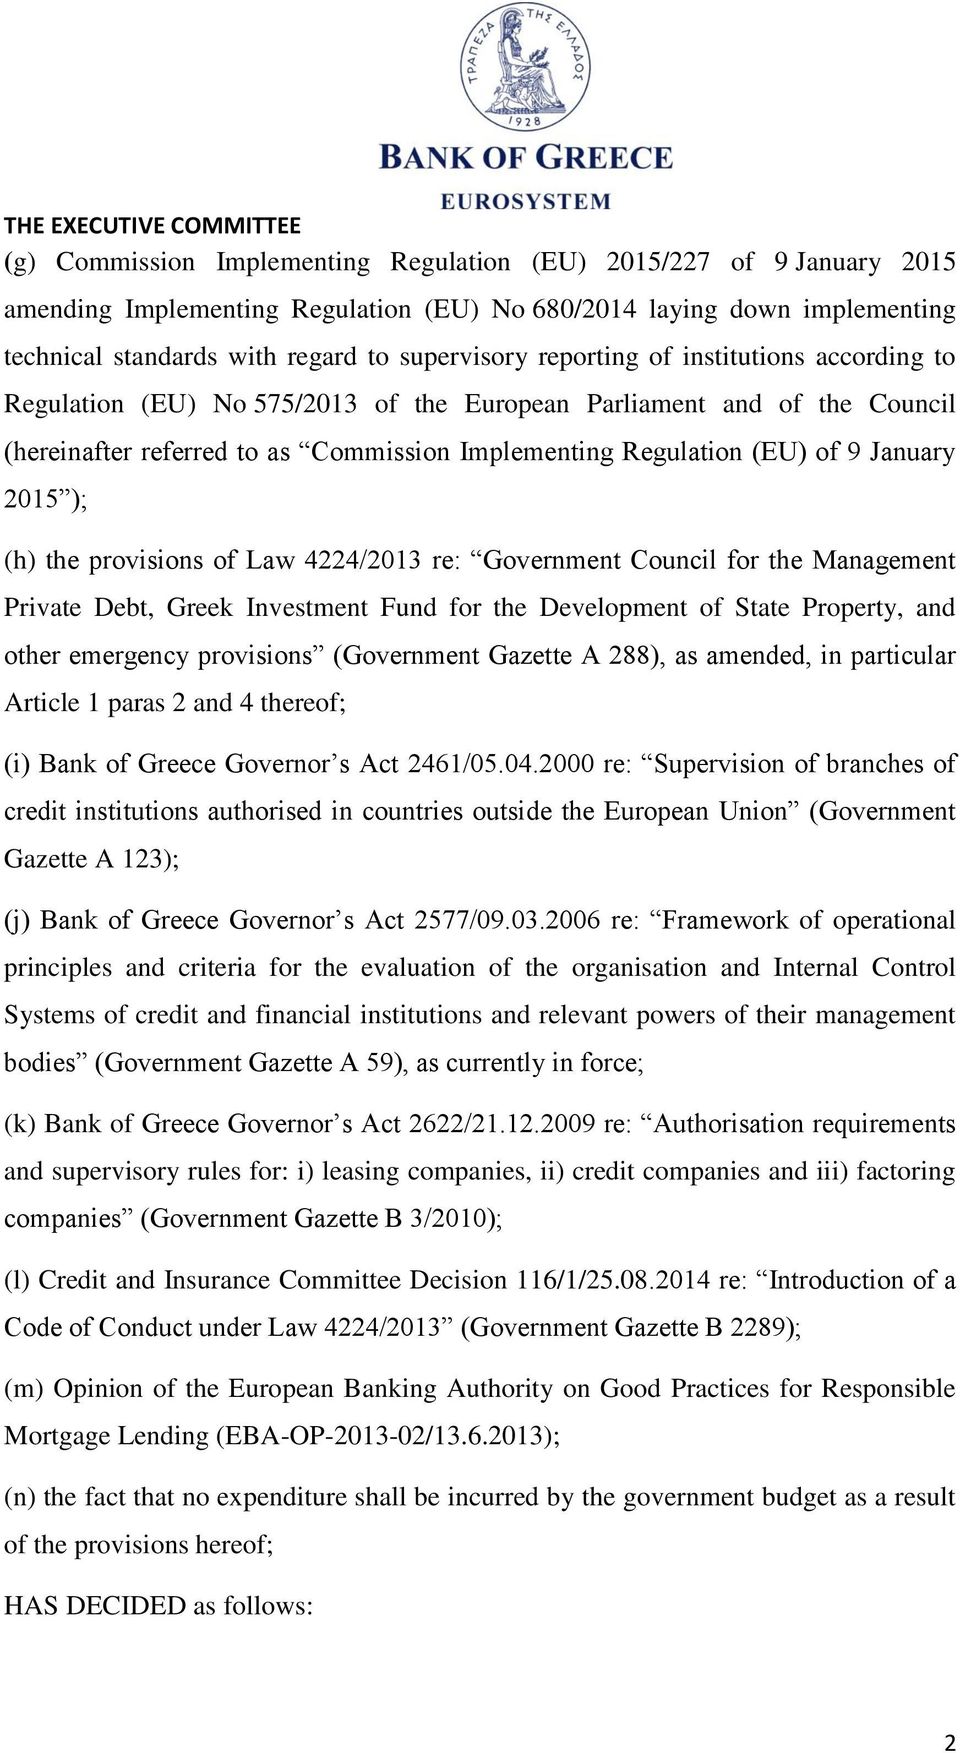 provisions of Law 4224/2013 re: Government Council for the Management Private Debt, Greek Investment Fund for the Development of State Property, and other emergency provisions (Government Gazette A